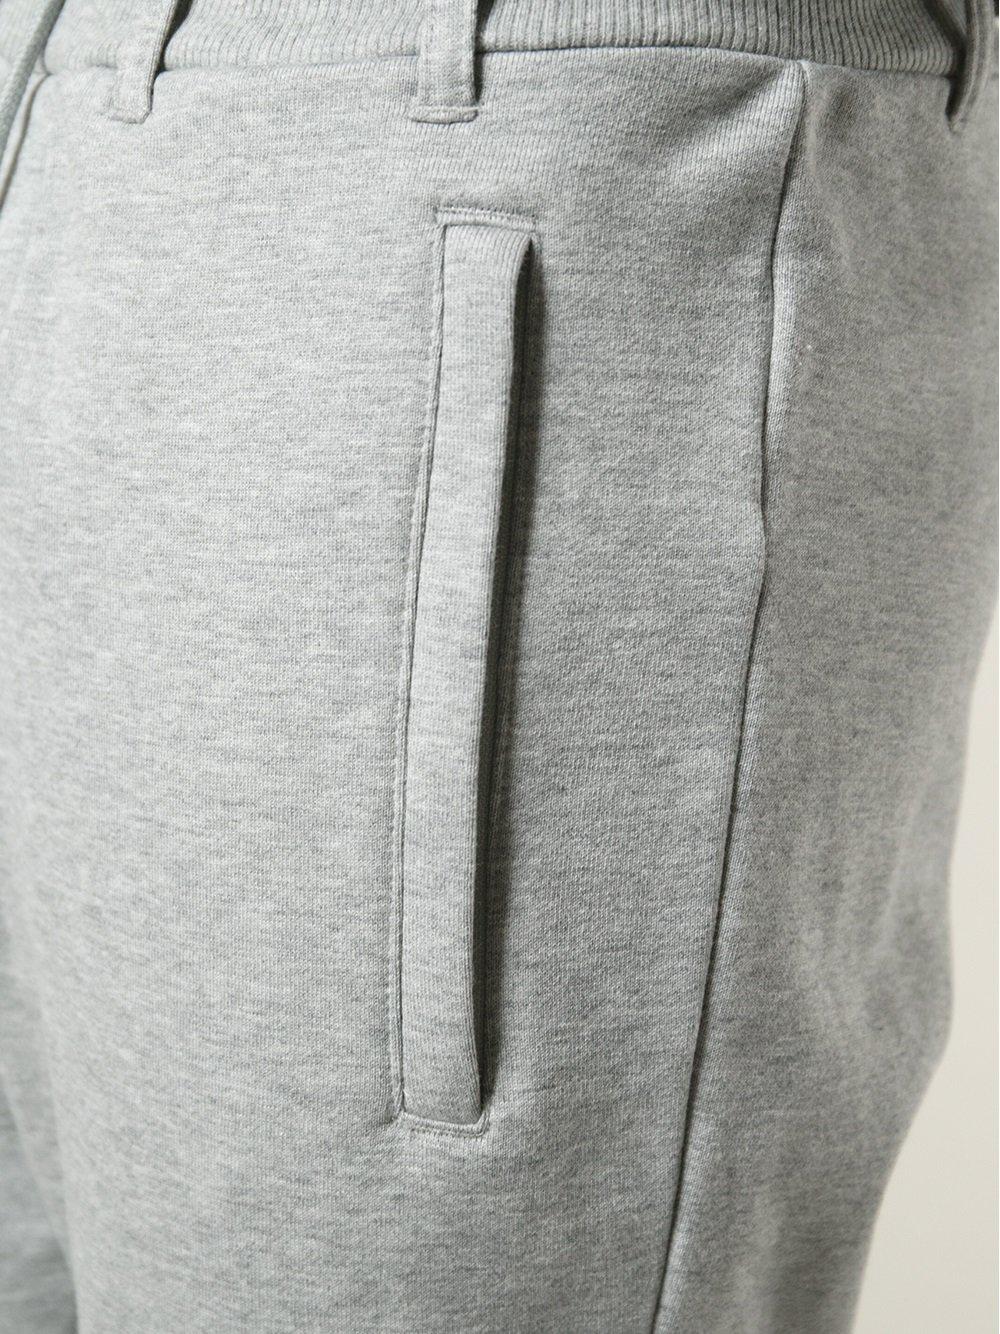 Y-3 Cotton Waistband With Belt Loops Track Trousers in Grey (Gray 